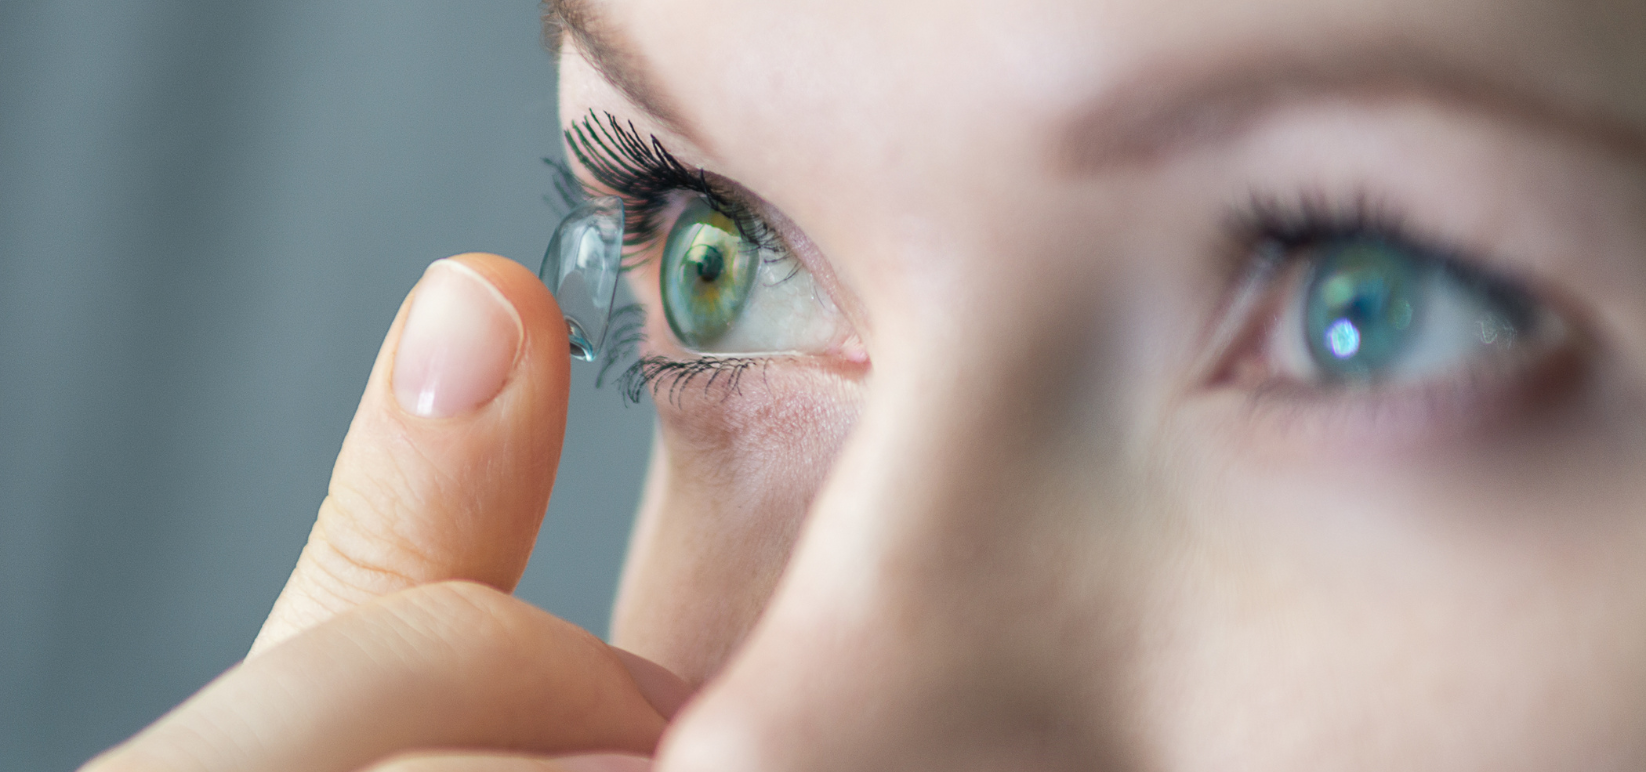 A woman demonstrates how to put in contacts